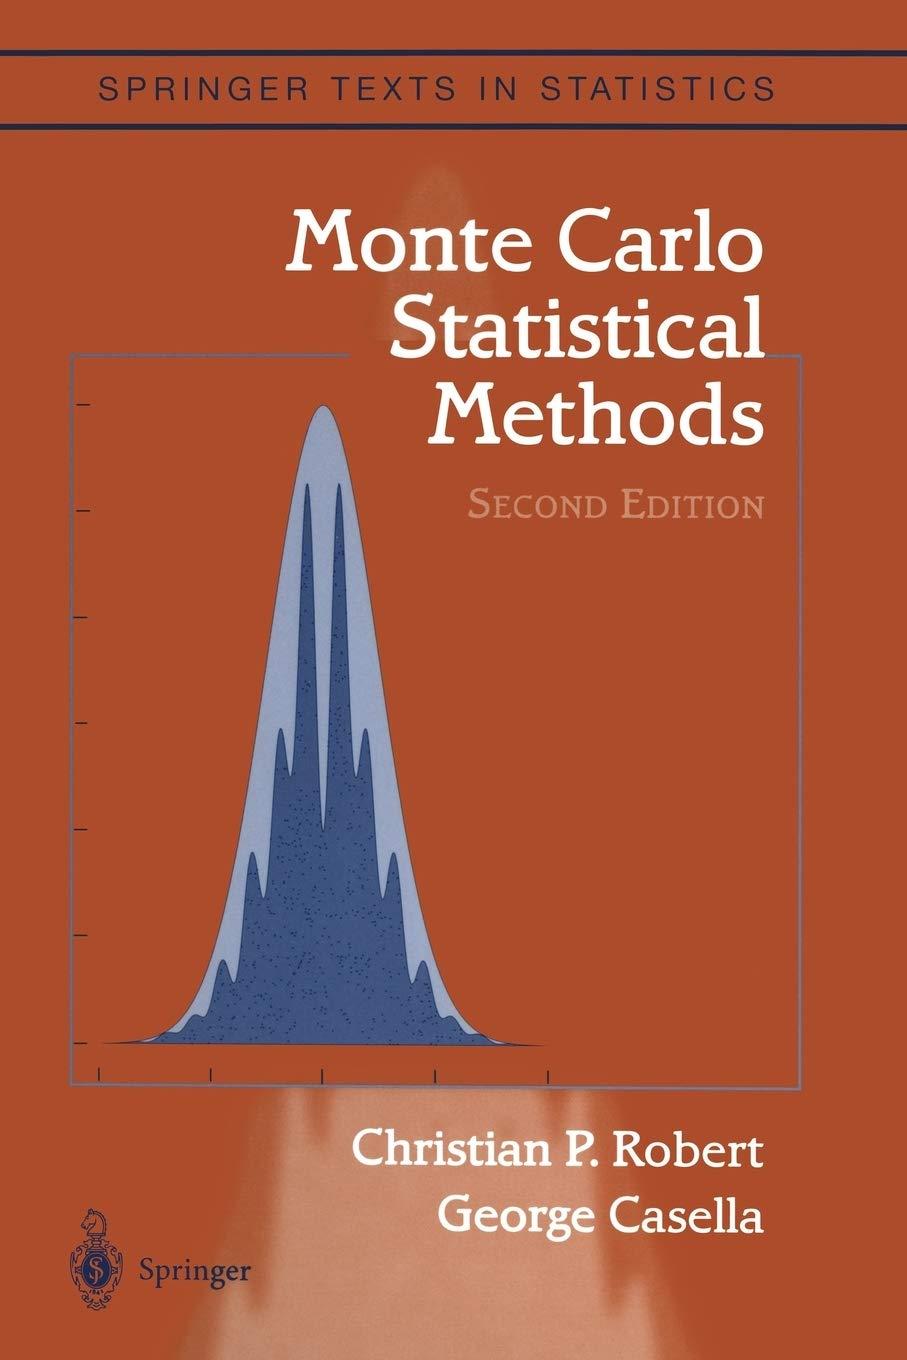 monte carlo statistical methods 2nd edition christian p. robert, george casella 1441919392, 9781441919397